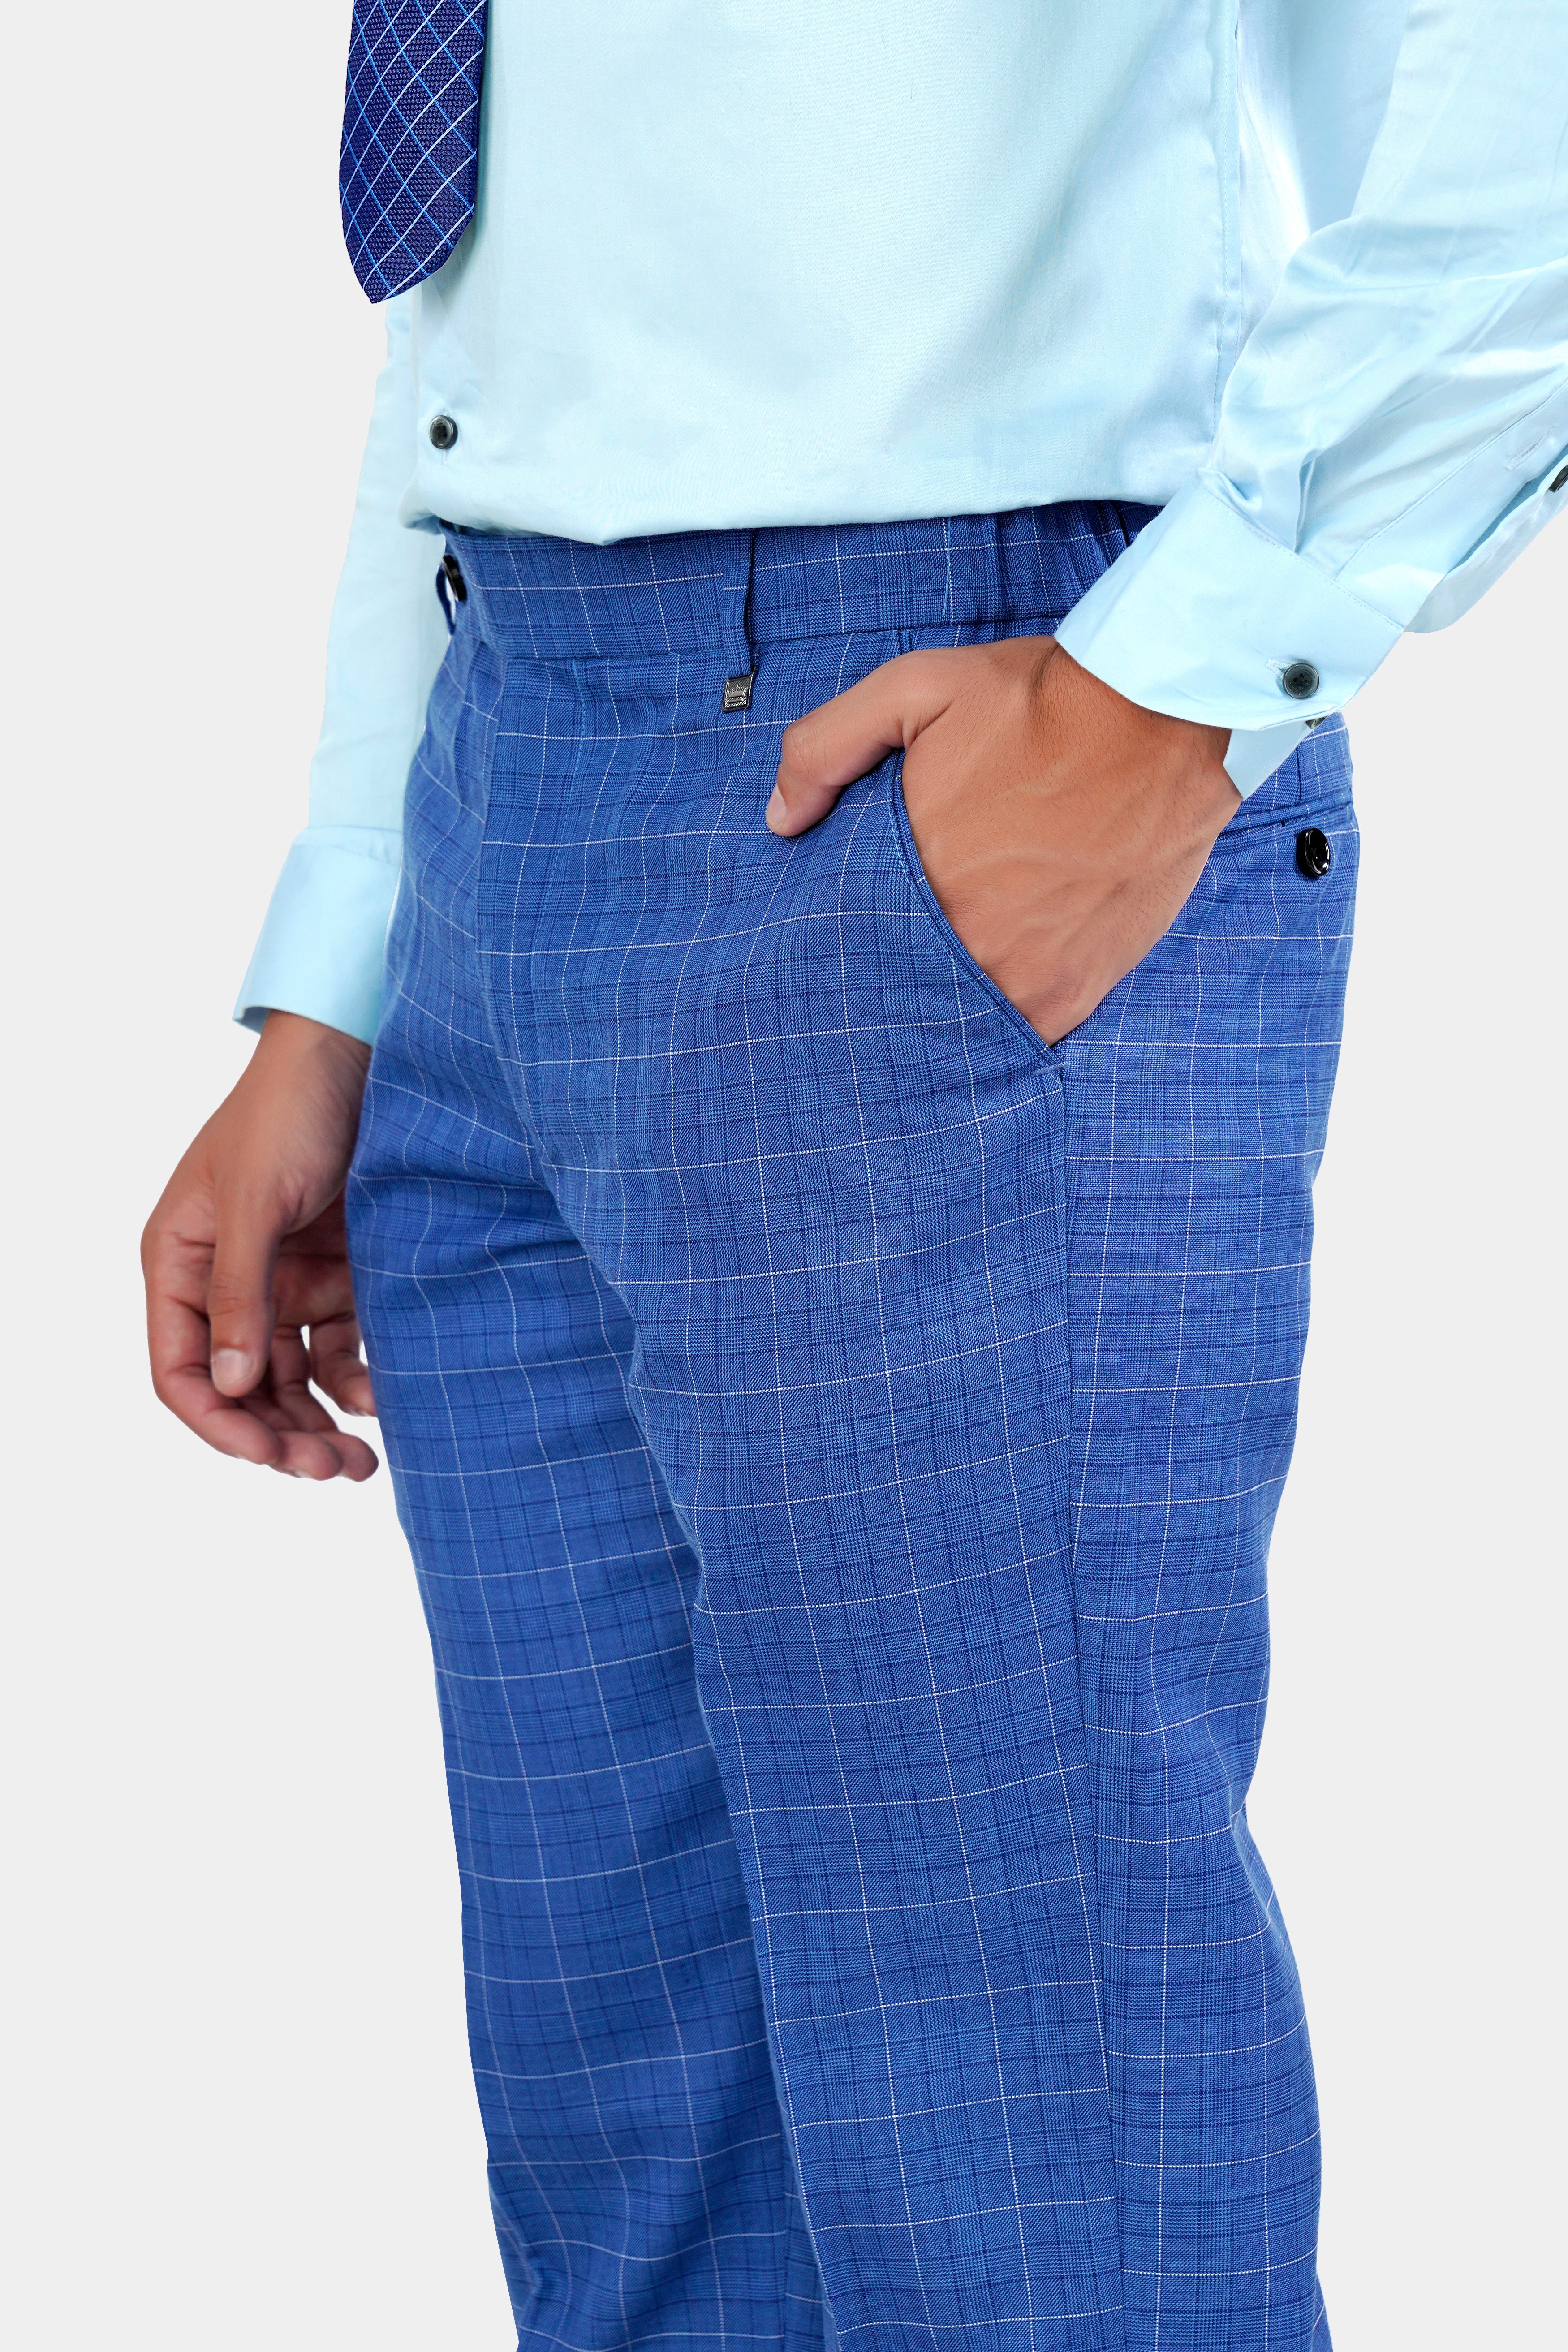 30 Inch Size Mens Trousers :Buy 30 Inch Size Mens Trousers Online at Low  Prices on Snapdeal.com